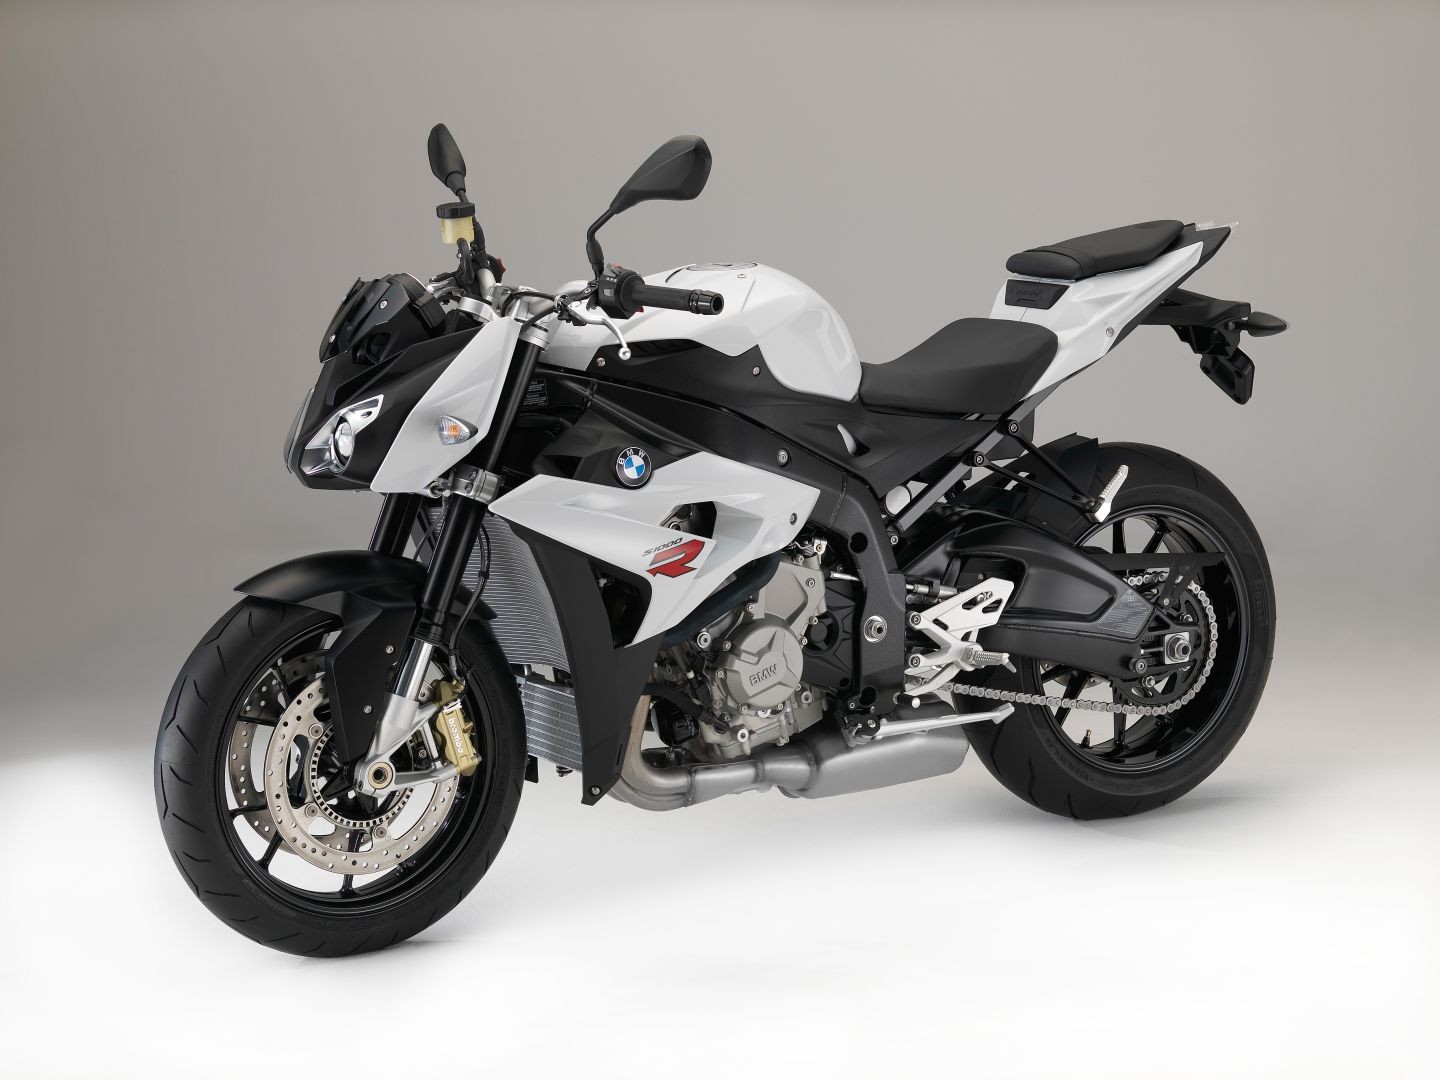 Bmw Motorcycles Get Upgraded Colors And New Features For 2016 Autoevolution